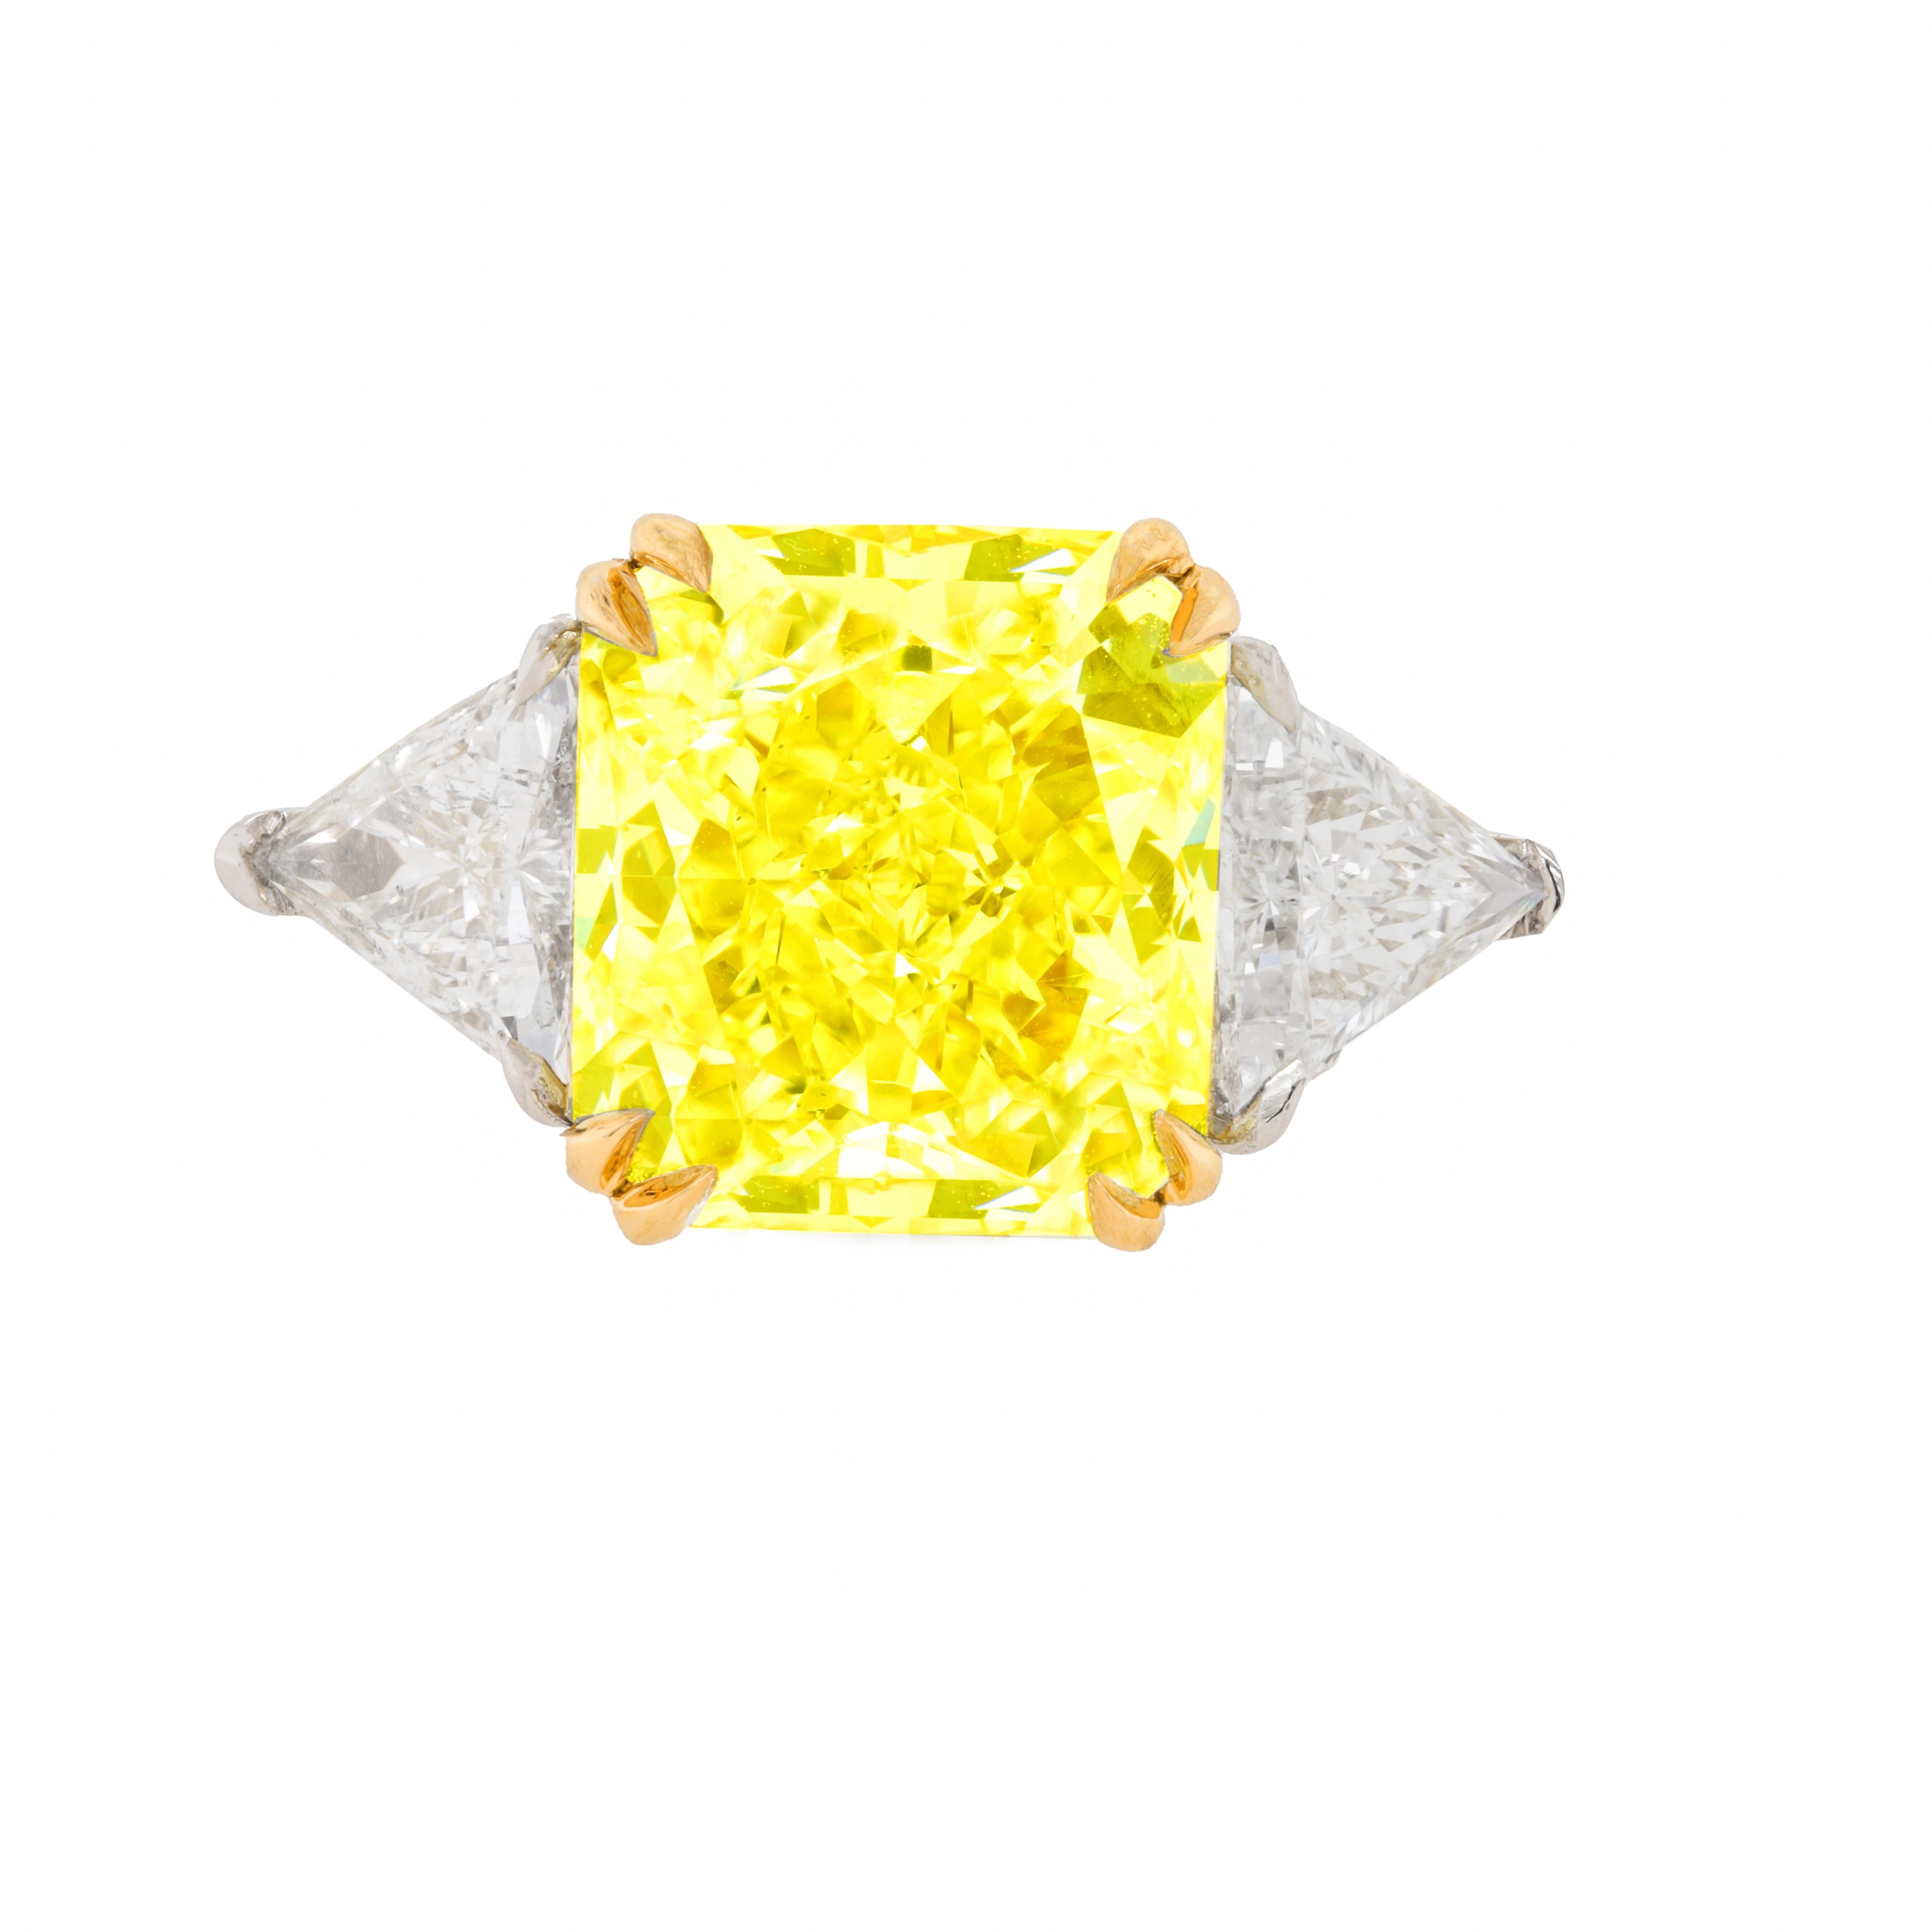 Platinum and 18kt yellow gold custom made ring with center diamond 5.96cts natural fancy yellow vs1 GIA certified #14467201 and 1.06cts of trillion set
